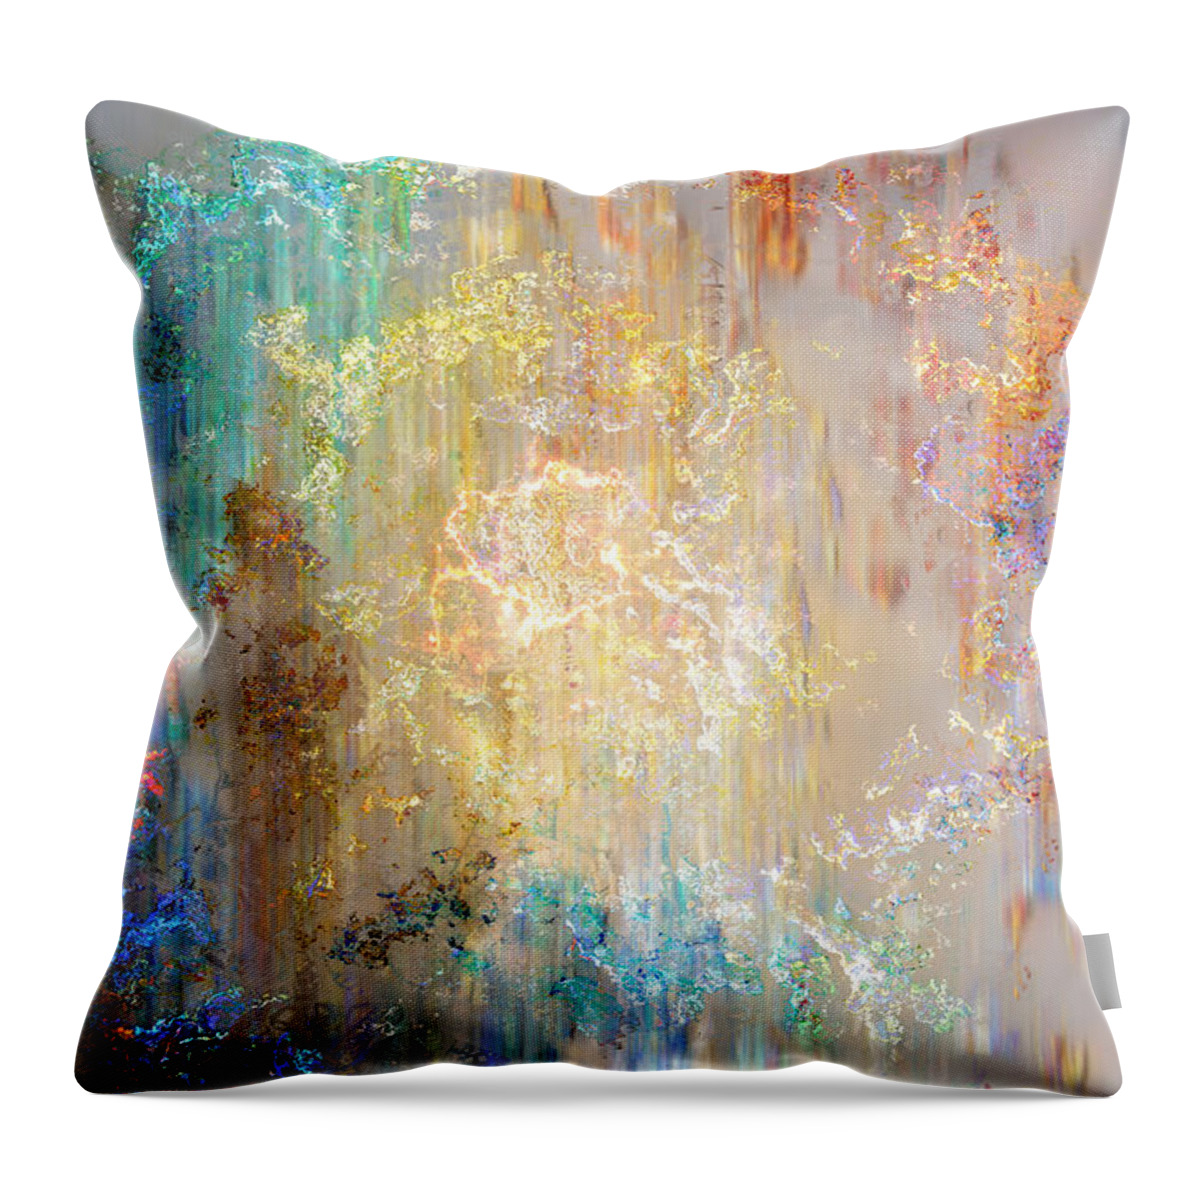 Abstract Art Throw Pillow featuring the painting A Heart So Big - Abstract Art by Jaison Cianelli